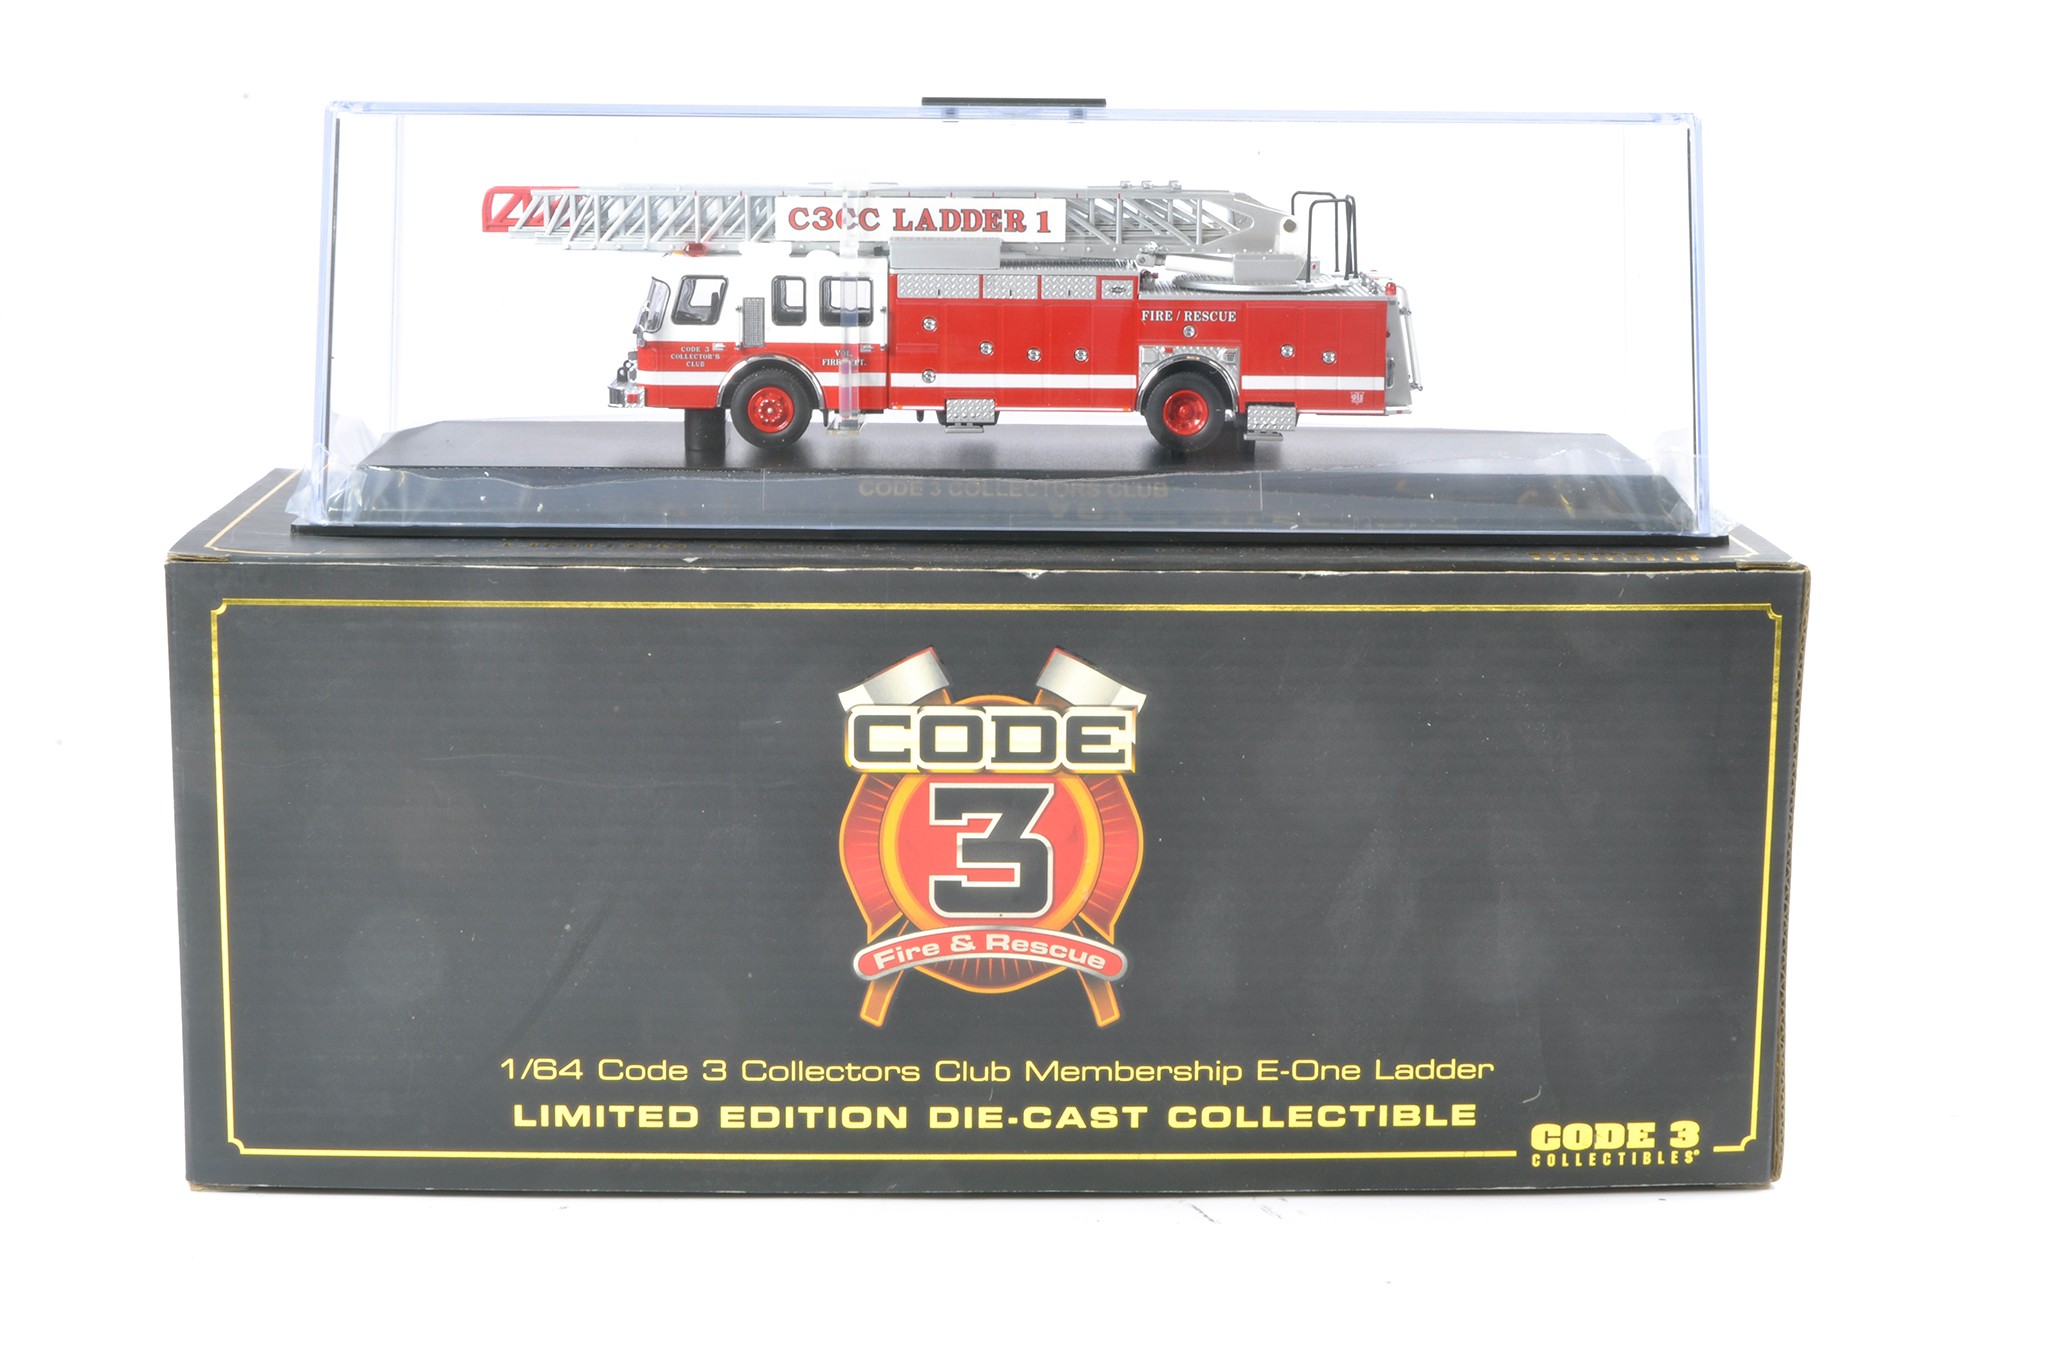 Fire and Rescue model issue comprising Code 3 Collectibles No.12962 E-One Ladder Truck in the livery